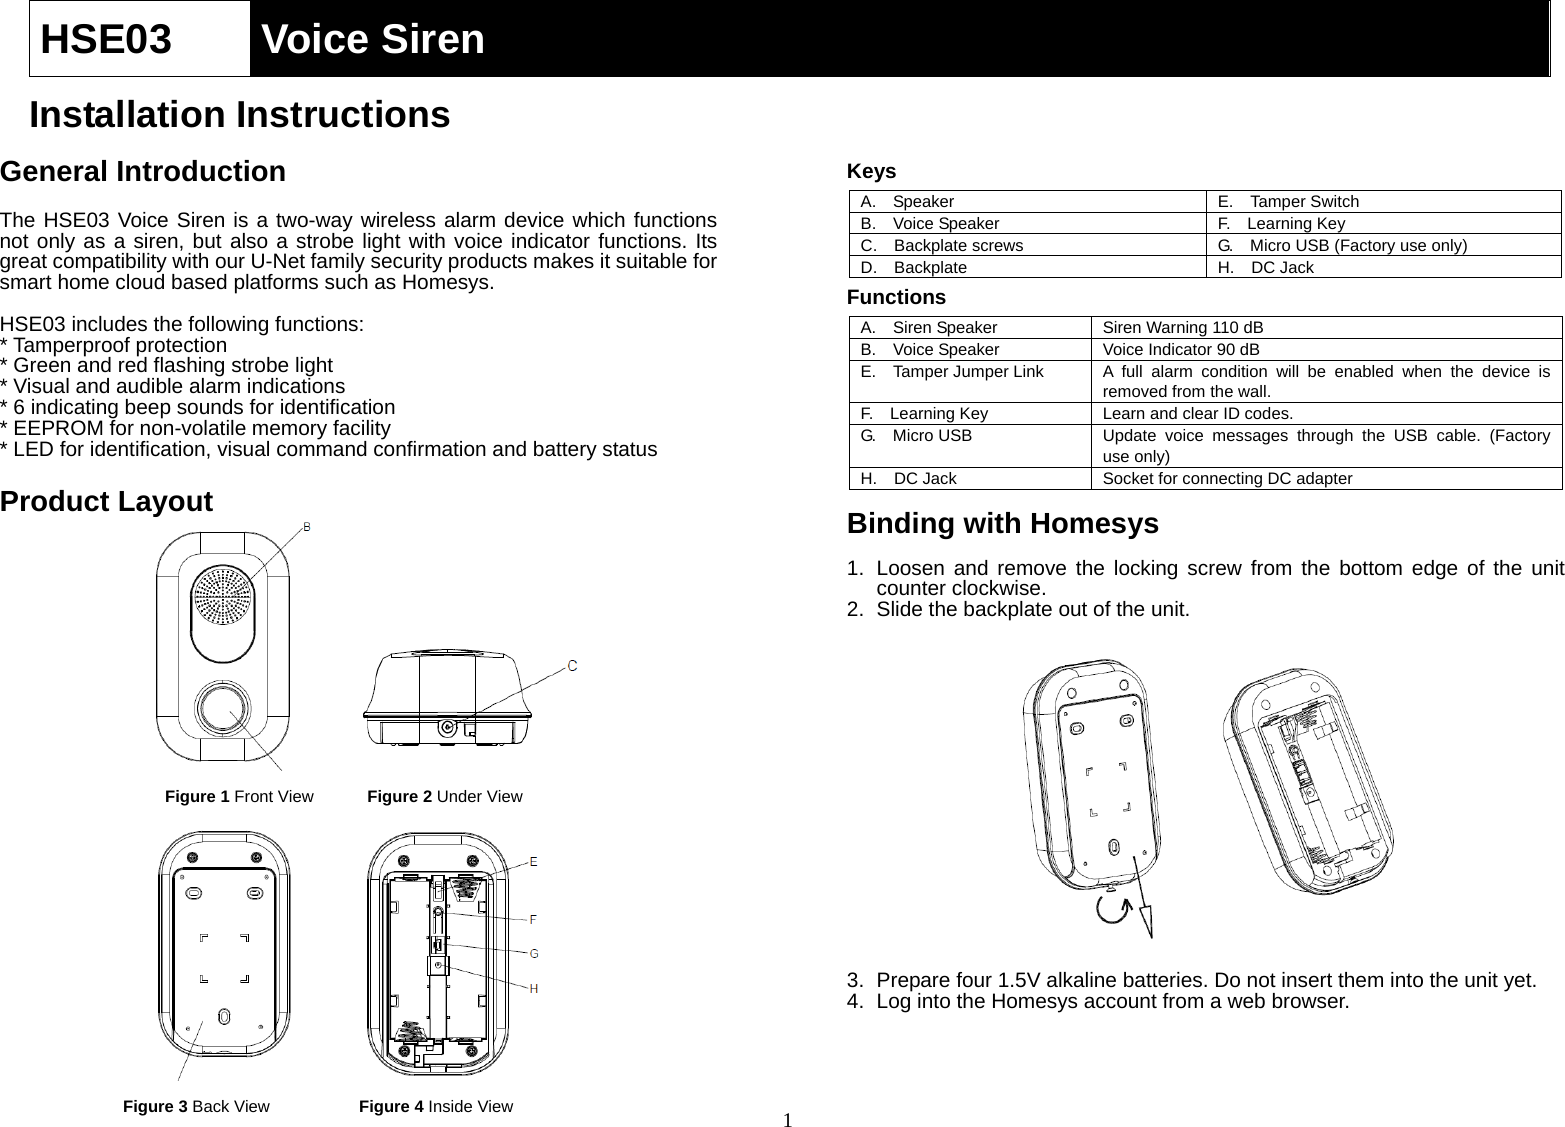  1HSE03  Voice Siren   Installation Instructions  General Introduction  The HSE03 Voice Siren is a two-way wireless alarm device which functions not only as a siren, but also a strobe light with voice indicator functions. Its great compatibility with our U-Net family security products makes it suitable for smart home cloud based platforms such as Homesys.    HSE03 includes the following functions: * Tamperproof protection * Green and red flashing strobe light * Visual and audible alarm indications * 6 indicating beep sounds for identification * EEPROM for non-volatile memory facility * LED for identification, visual command confirmation and battery status  Product Layout                Keys A.  Speaker E.  Tamper SwitchB.  Voice Speaker F.  Learning KeyC.  Backplate screws G.    Micro USB (Factory use only) D.  Backplate H.  DC JackFunctions A.    Siren Speaker  Siren Warning 110 dB B.    Voice Speaker  Voice Indicator 90 dB E.  Tamper Jumper Link  A full alarm condition will be enabled when the device is removed from the wall. F.    Learning Key  Learn and clear ID codes. G.  Micro USB  Update voice messages through the USB cable. (Factory use only) H.    DC Jack  Socket for connecting DC adapter  Binding with Homesys  1.  Loosen and remove the locking screw from the bottom edge of the unit counter clockwise. 2.  Slide the backplate out of the unit.             3.  Prepare four 1.5V alkaline batteries. Do not insert them into the unit yet. 4.  Log into the Homesys account from a web browser.     Figure 1 Front ViewFigure 4 Inside View Figure 2 Under View Figure 3 Back View 